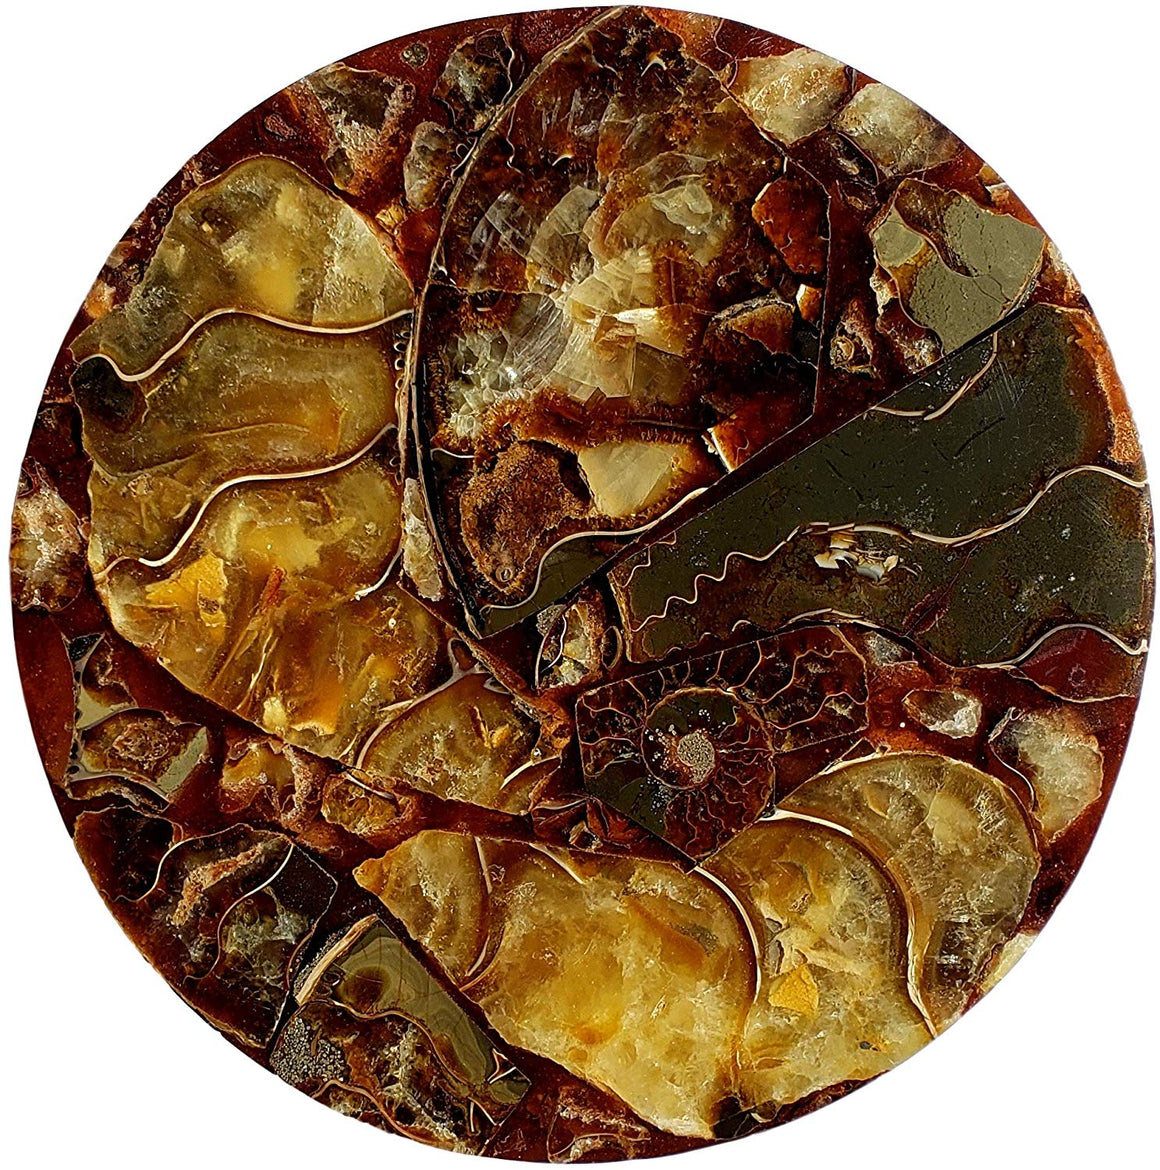 Genuine Multi-Ammonite Fossil Collage Display Specimen and Decorative Serving Platter or Large Coaster from Madagascar (Small) - dinosaursrocksuperstore